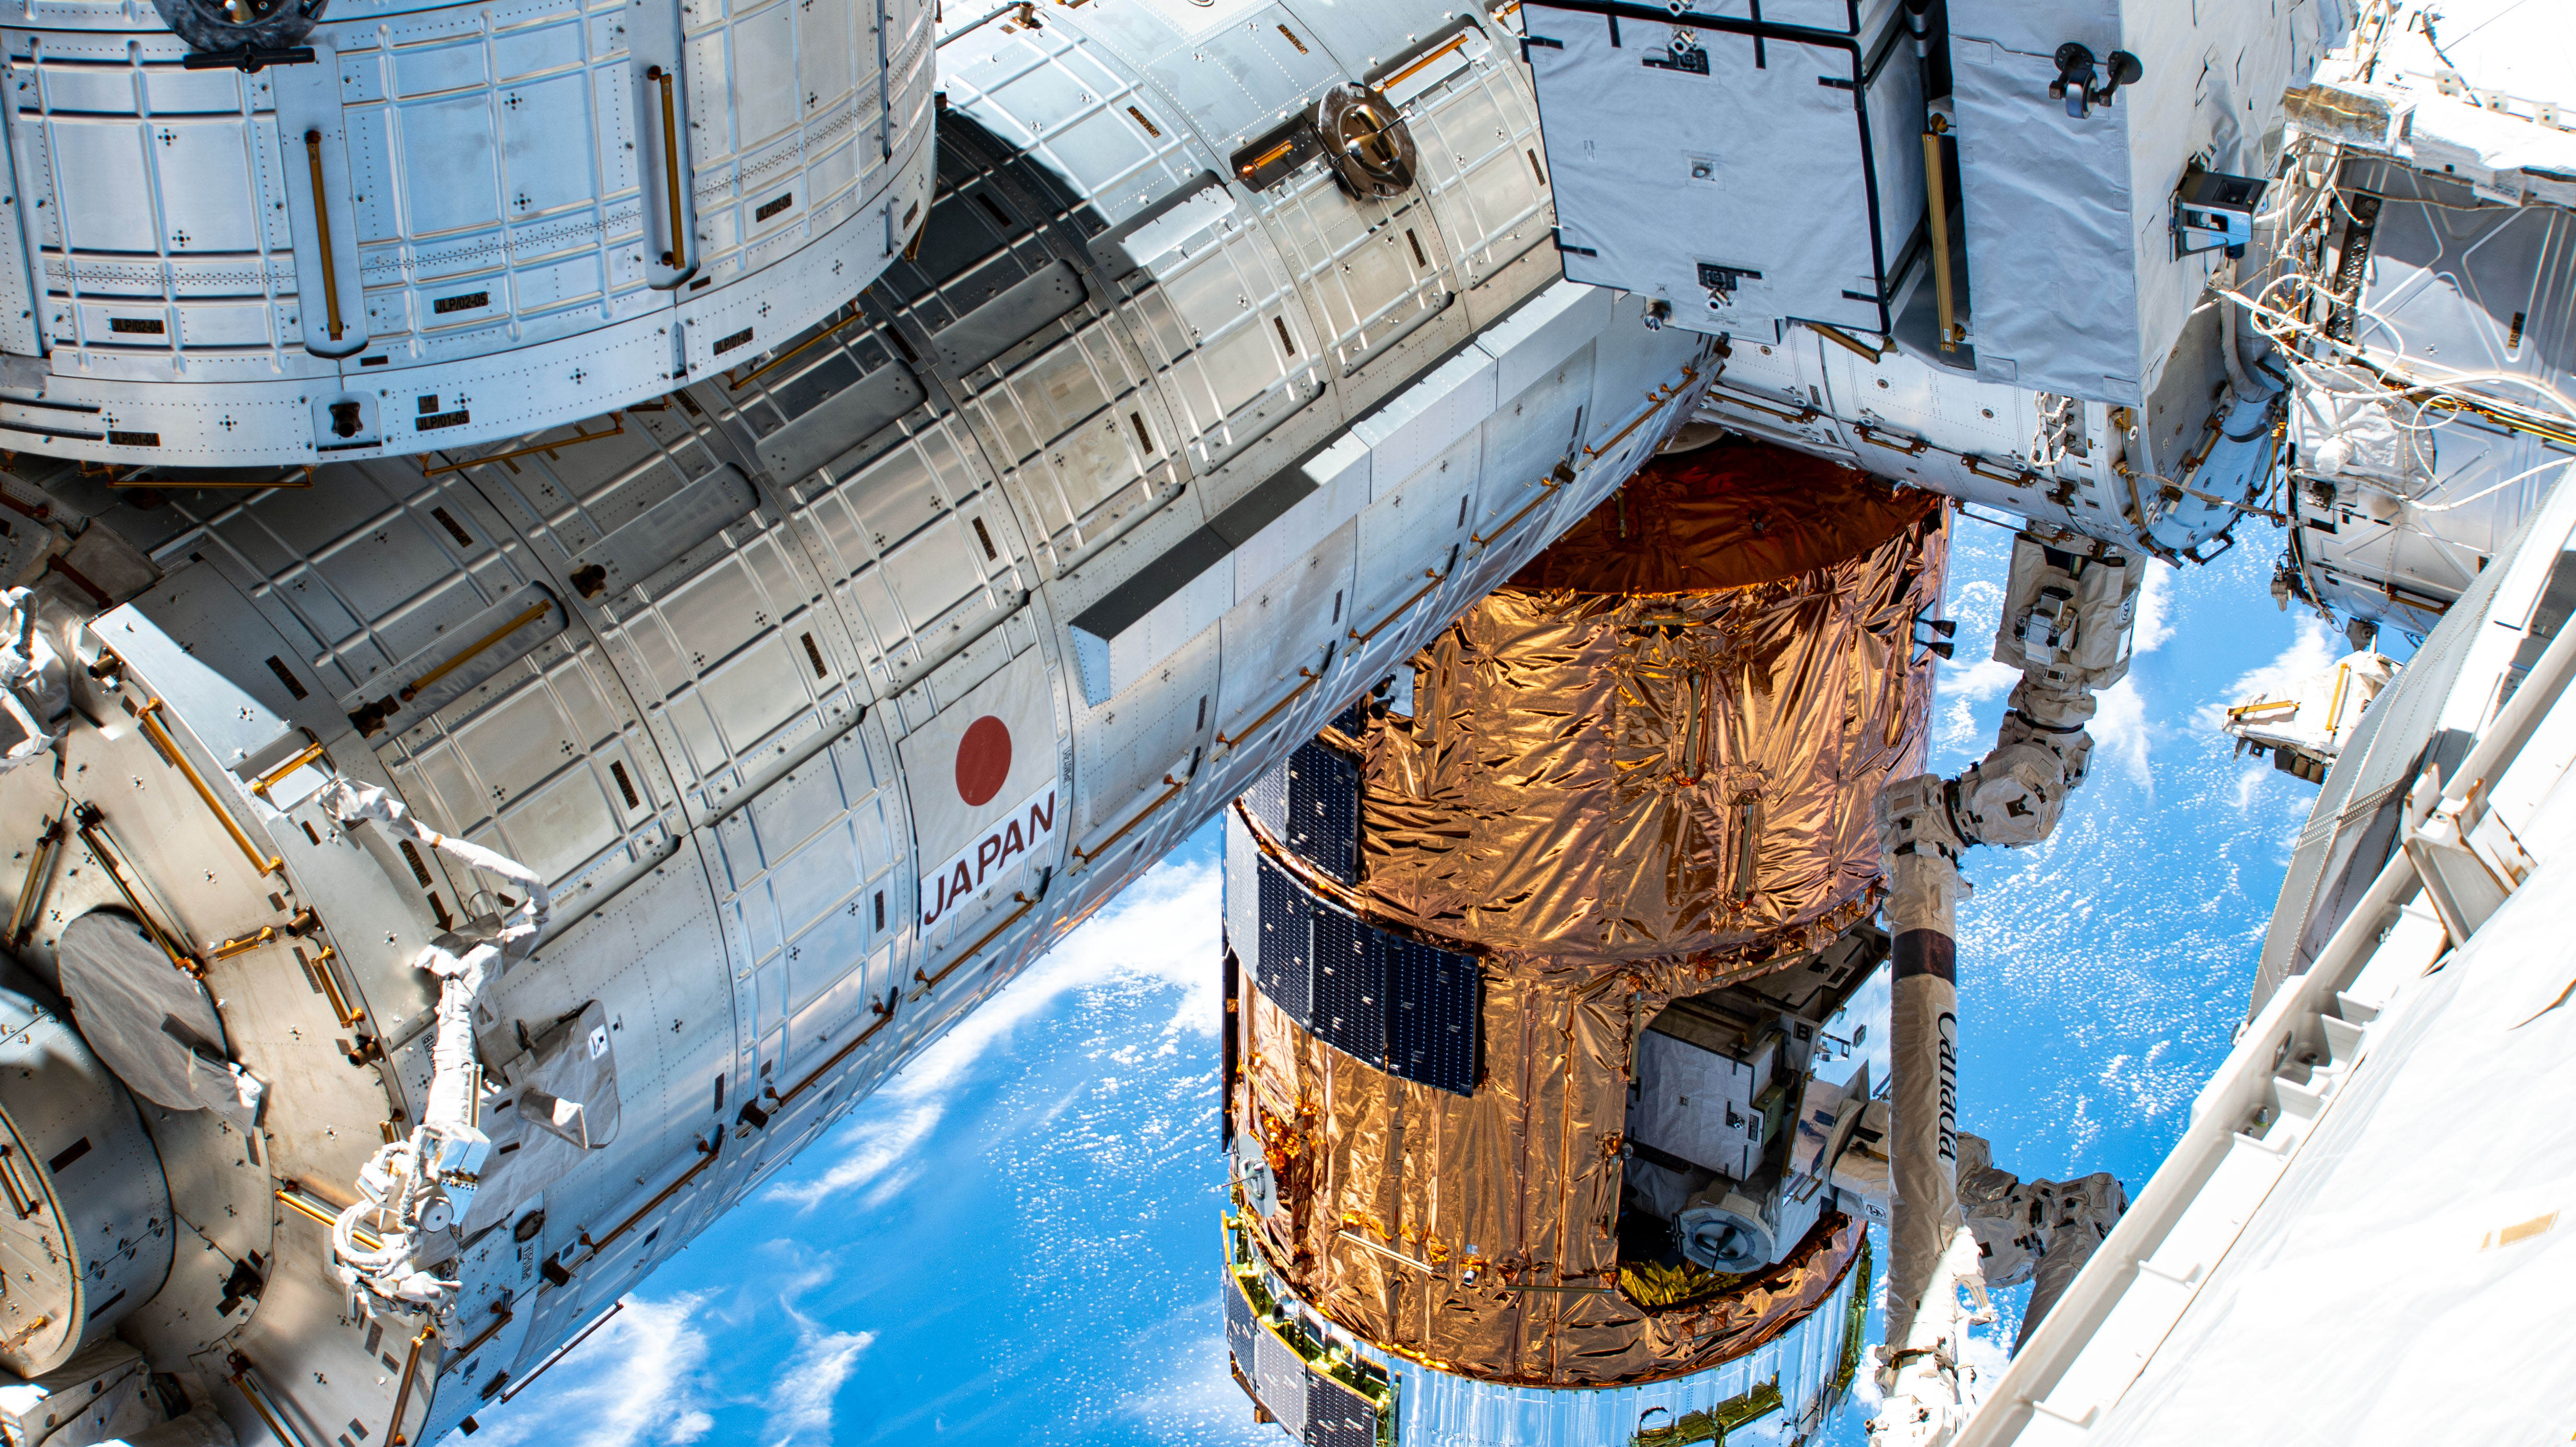 This oblique view from the port side of the International Space Station's truss structure shows JAXA's (Japan Aerospace Exploration Agency) and the Canadian Space Agency's (CSA) contribution to the orbiting lab. Included in this photograph is a major portion of the Kibo laboratory module, the H-II Transfer Vehicle-9 (HTV-9) resupply ship and the Canadarm2 robotic arm.